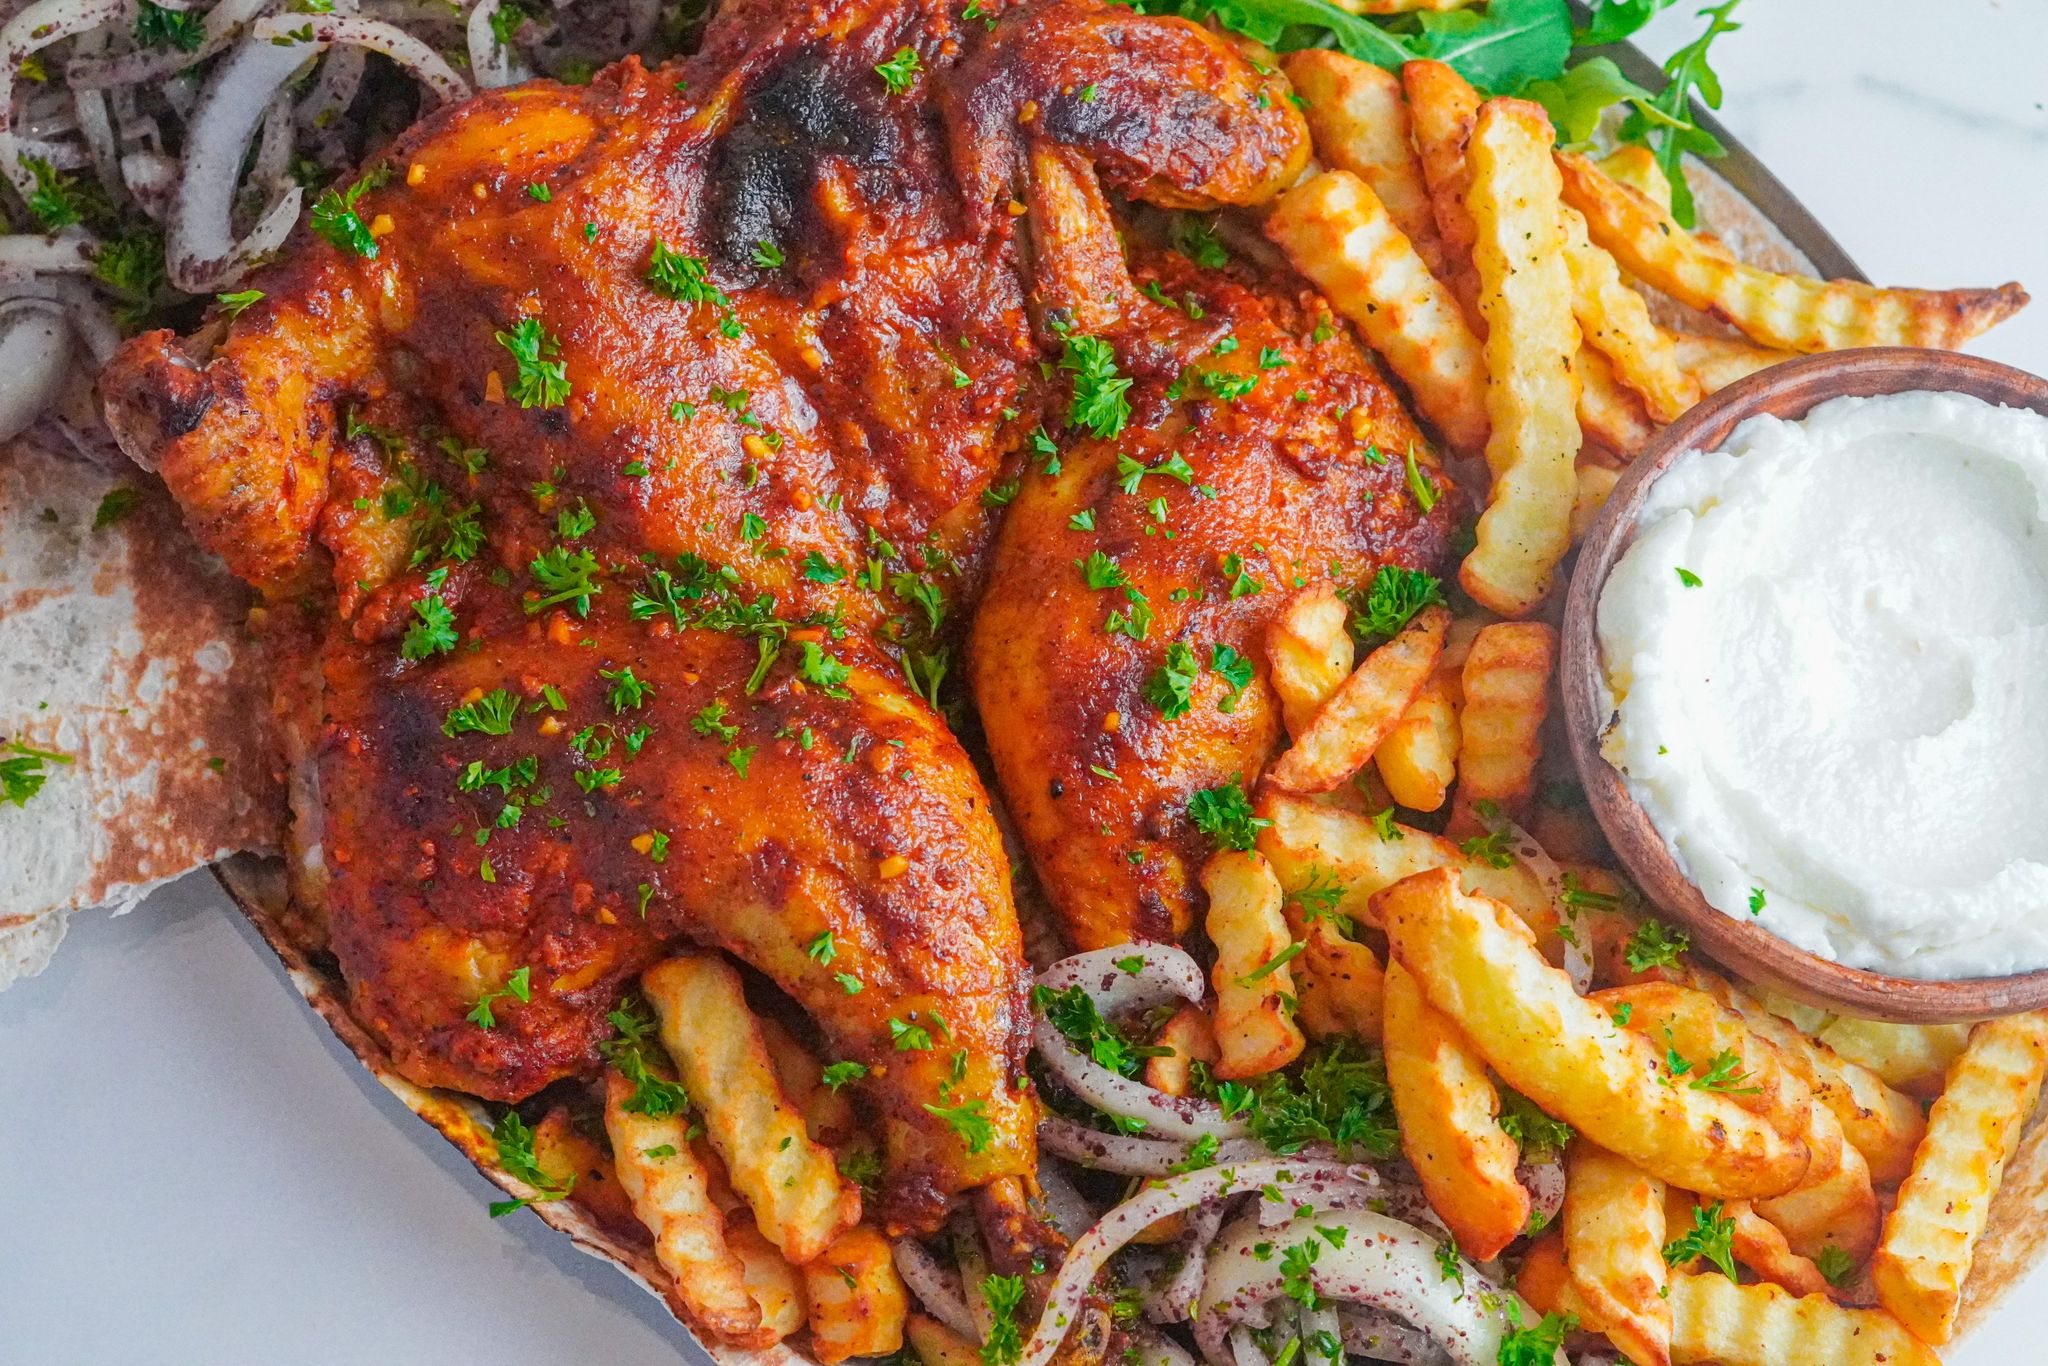 A well marinated chicken with crunchy crinkle-cut fries on a bed of sliced onions blended with sumac, and creamy garlic paste on the side.